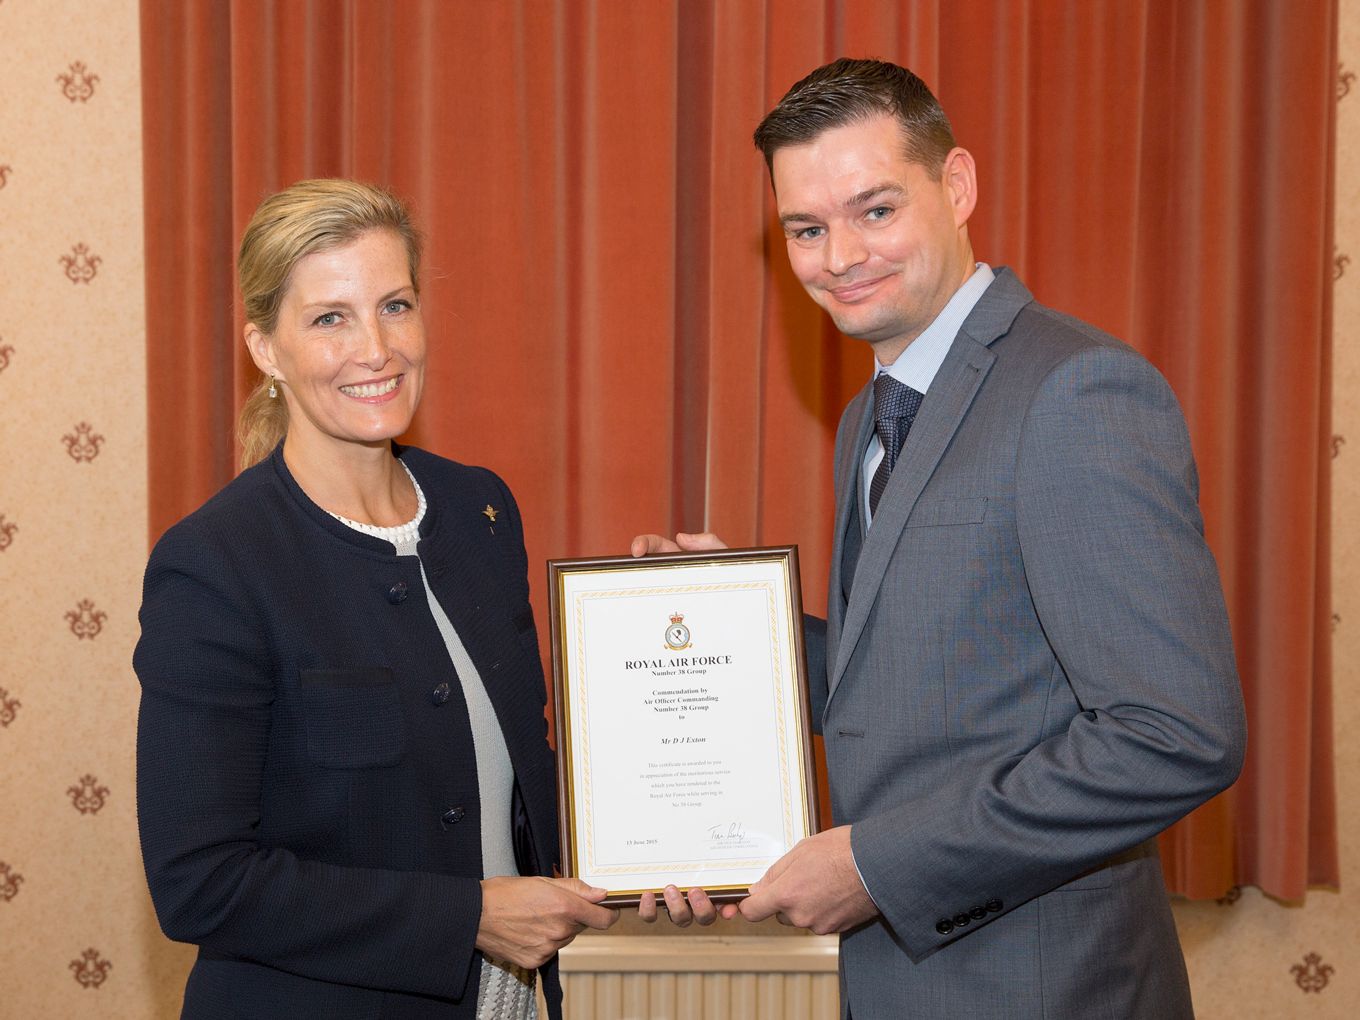 Darren Allen-Exton in 2015 receiving a special commendation from HRH Countess of Wessex